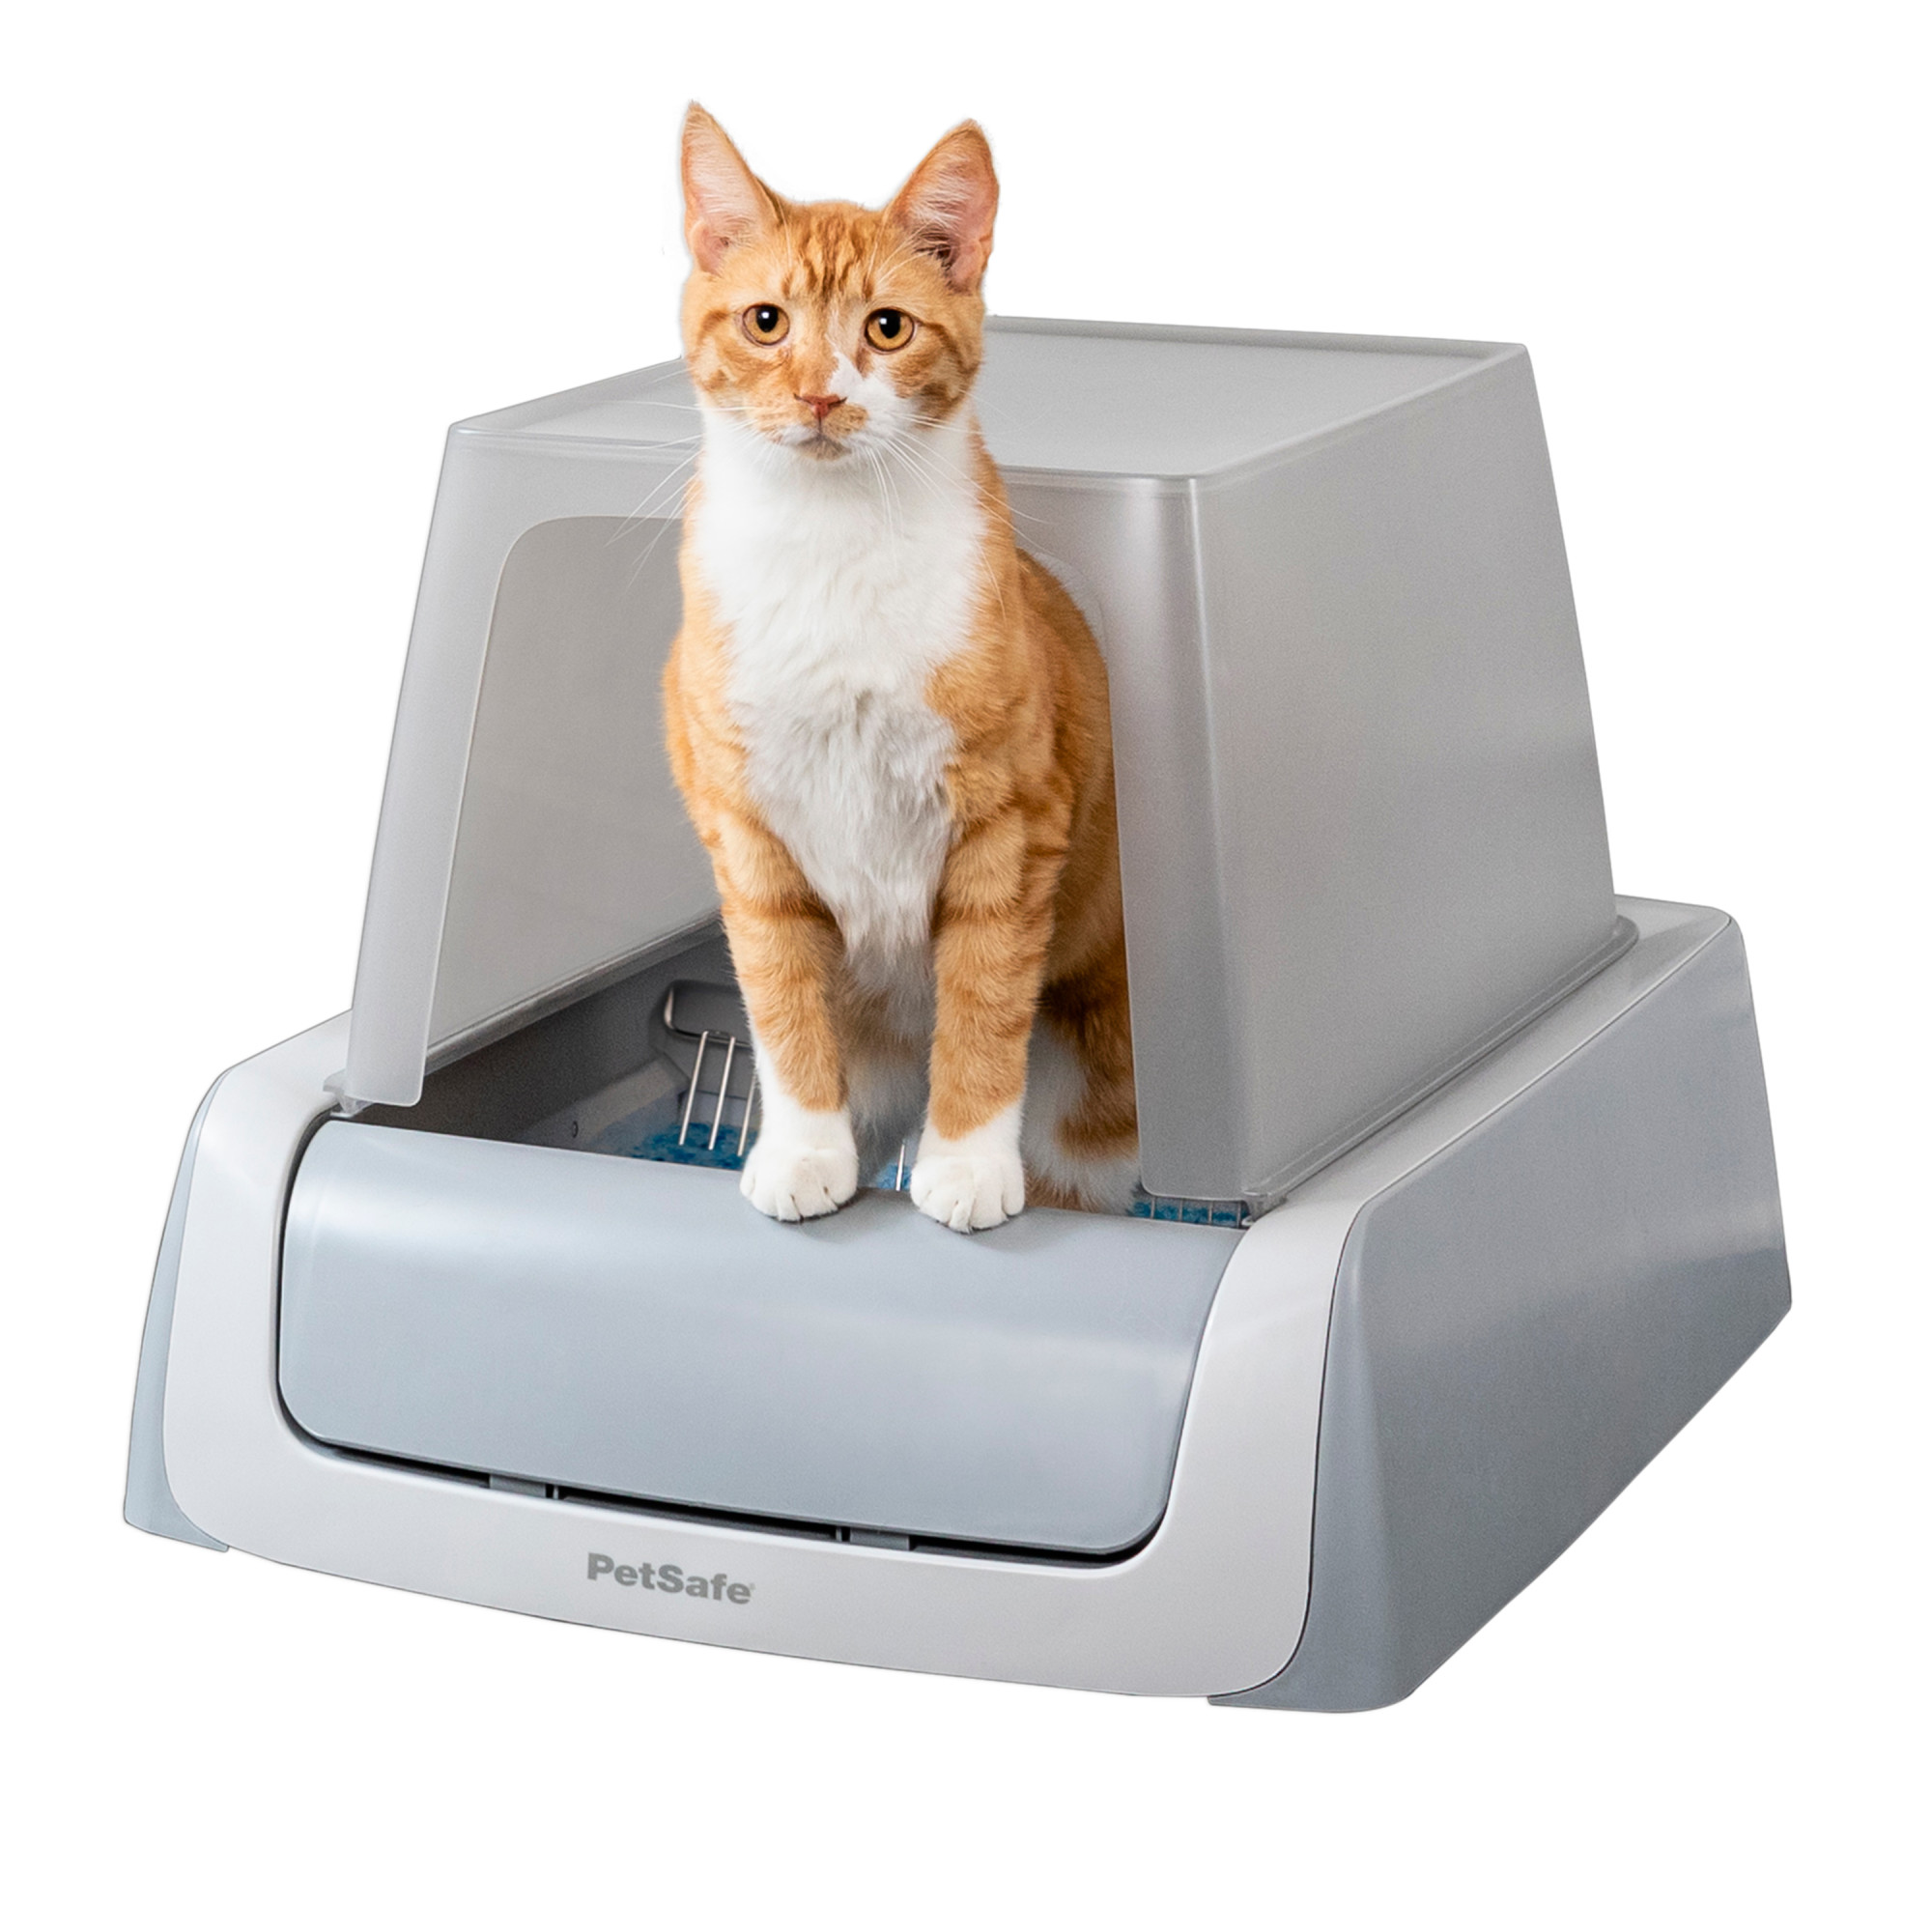 PetSafe ScoopFree Crystal Pro Front-Entry Self-Cleaning Cat Litter Box, Automatic, Gray - image 1 of 11